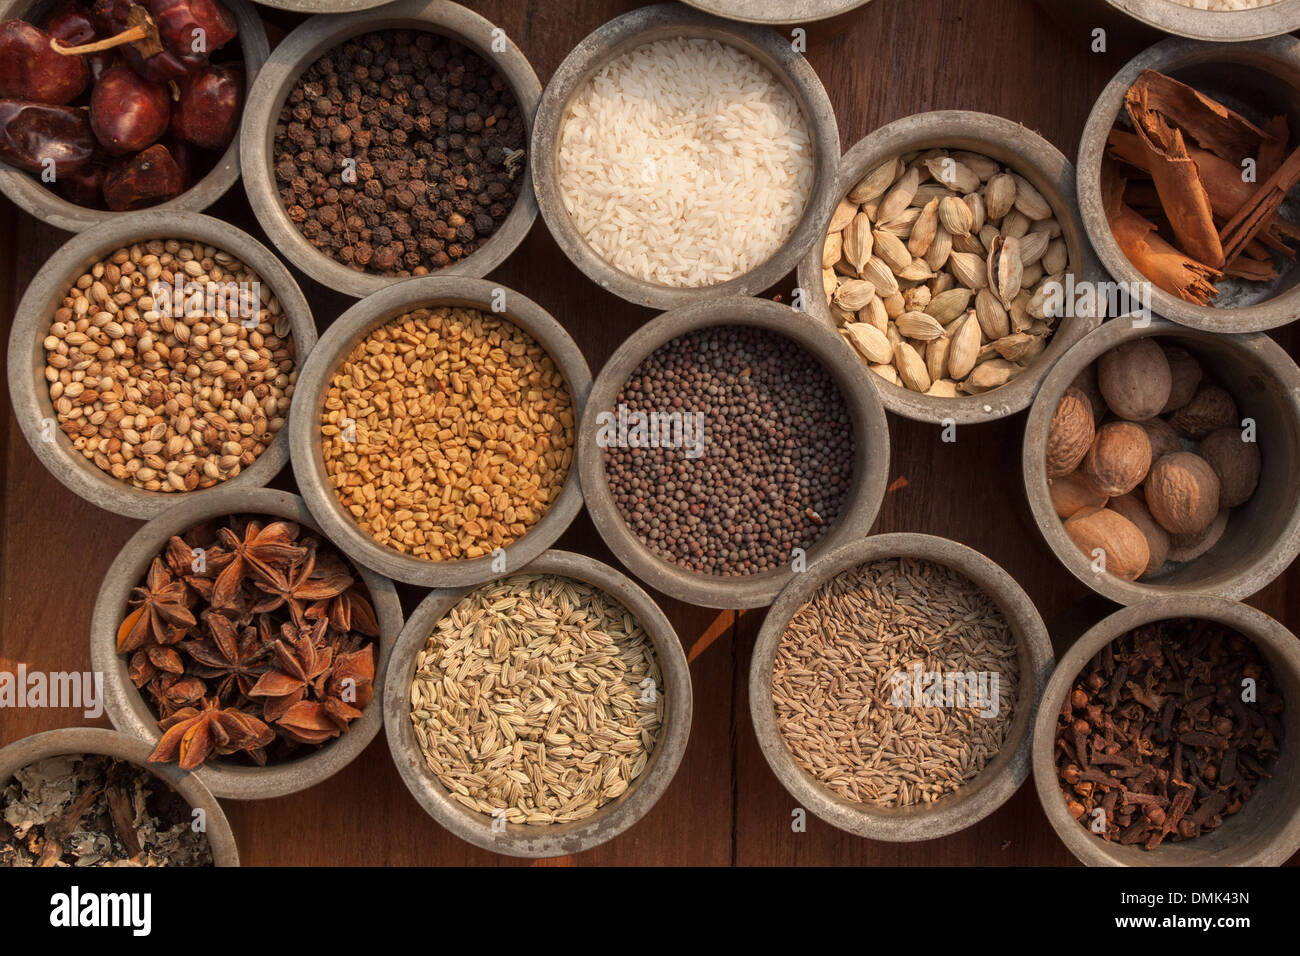 PLATTER OF SPICES WITH CILANTRO (FAR LEFT IN THE MIDDLE), STAR ANISE (FAR LEFT ON THE BOTTOM), FENUGREEK (TO THE LEFT IN THE MIDDLE), MUSTARD SEEDS (IN THE MIDDLE), CARDAMOM (ABOVE TO THE RIGHT), CINNAMON (ABOVE FAR RIGHT) AND DIVERSE VARIETIES OF RICE, S Stock Photo